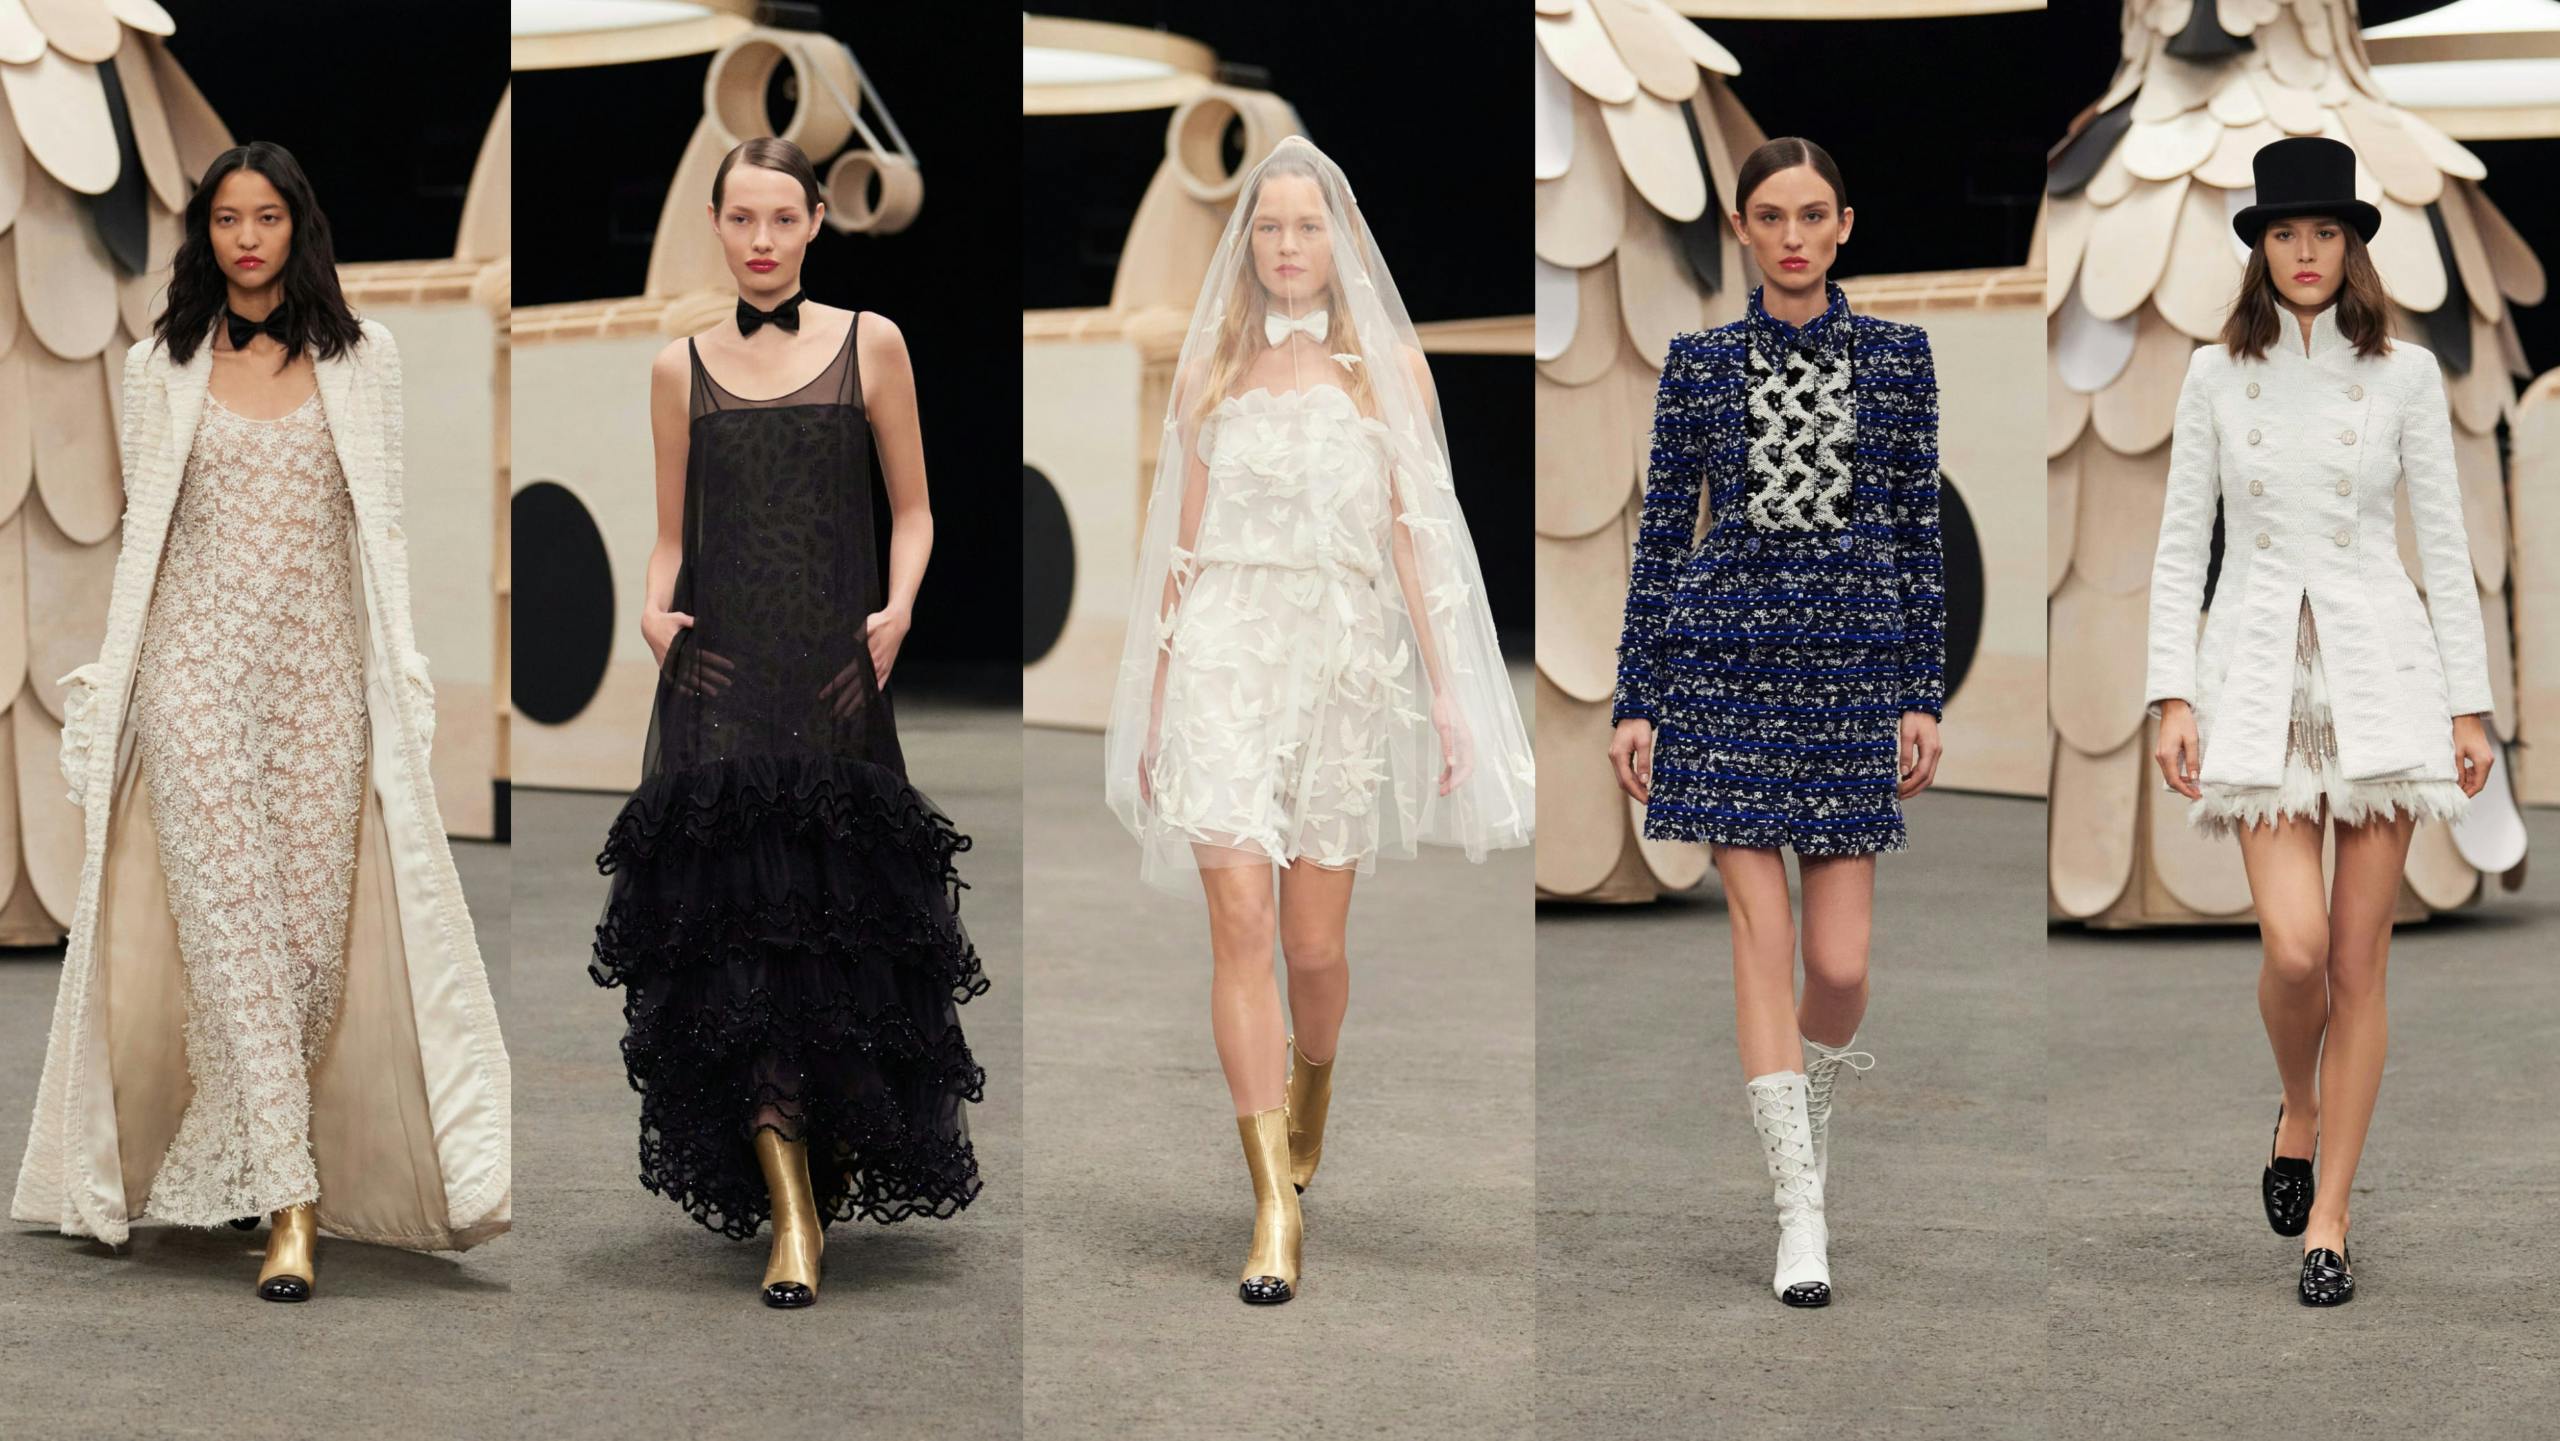 In the Chanel haute couture collection, there is a parade of